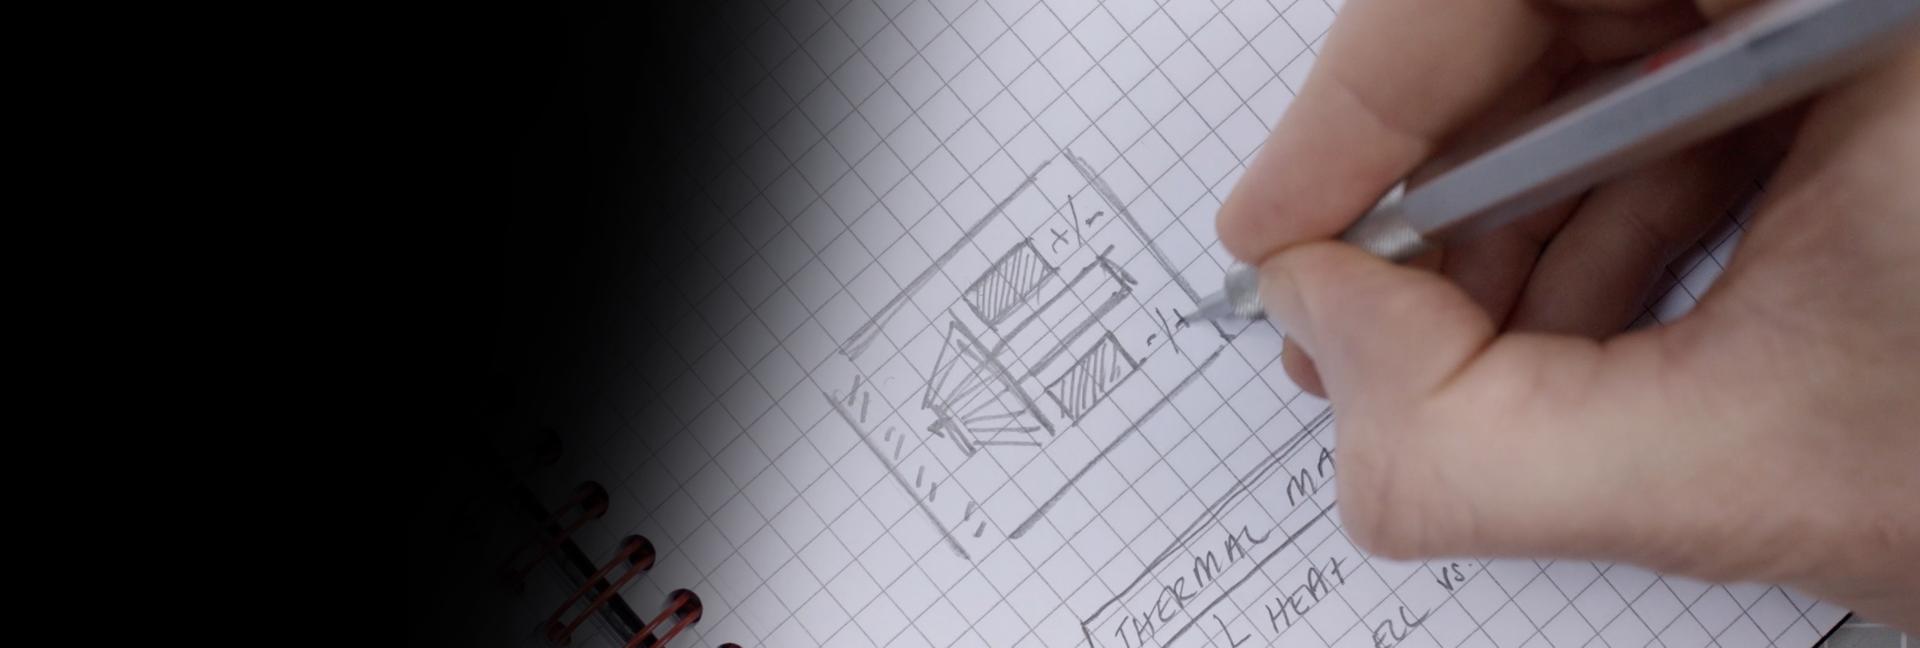 Close-up of James Dyson sketching on paper